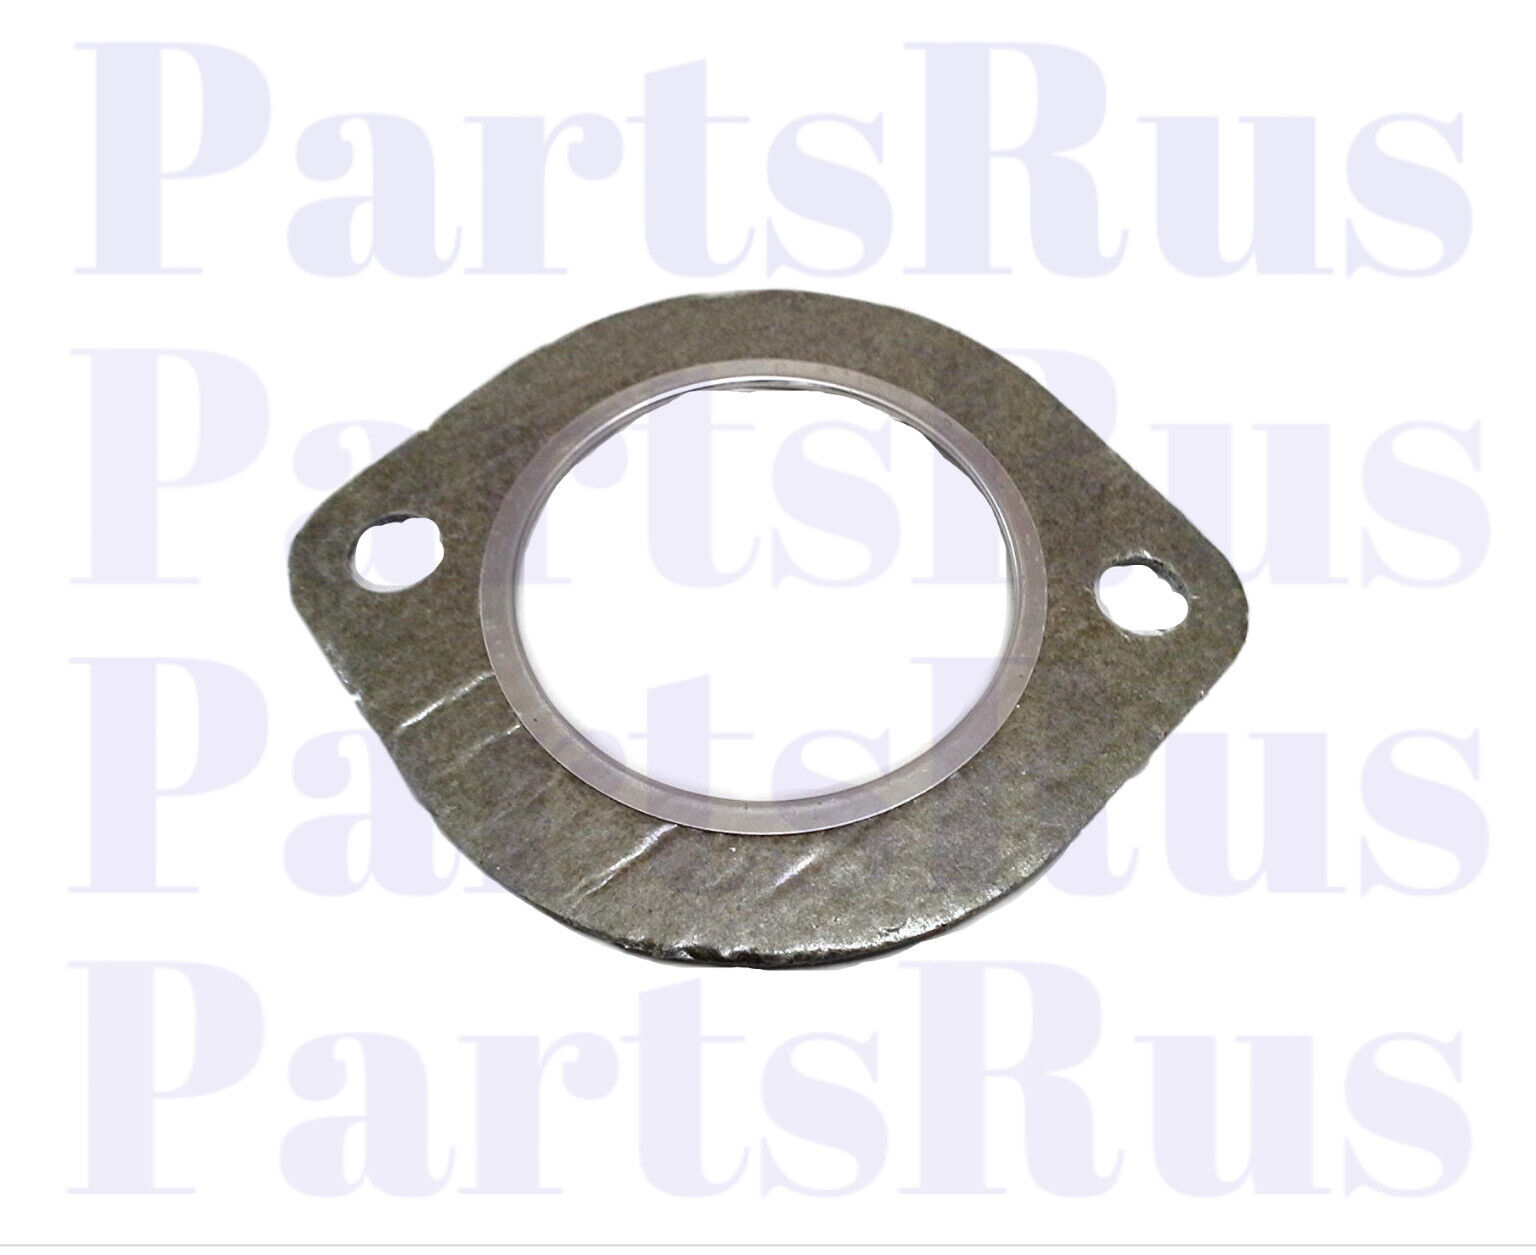 Genuine Smart Fortwo Exhaust Gasket Seal 1321420080